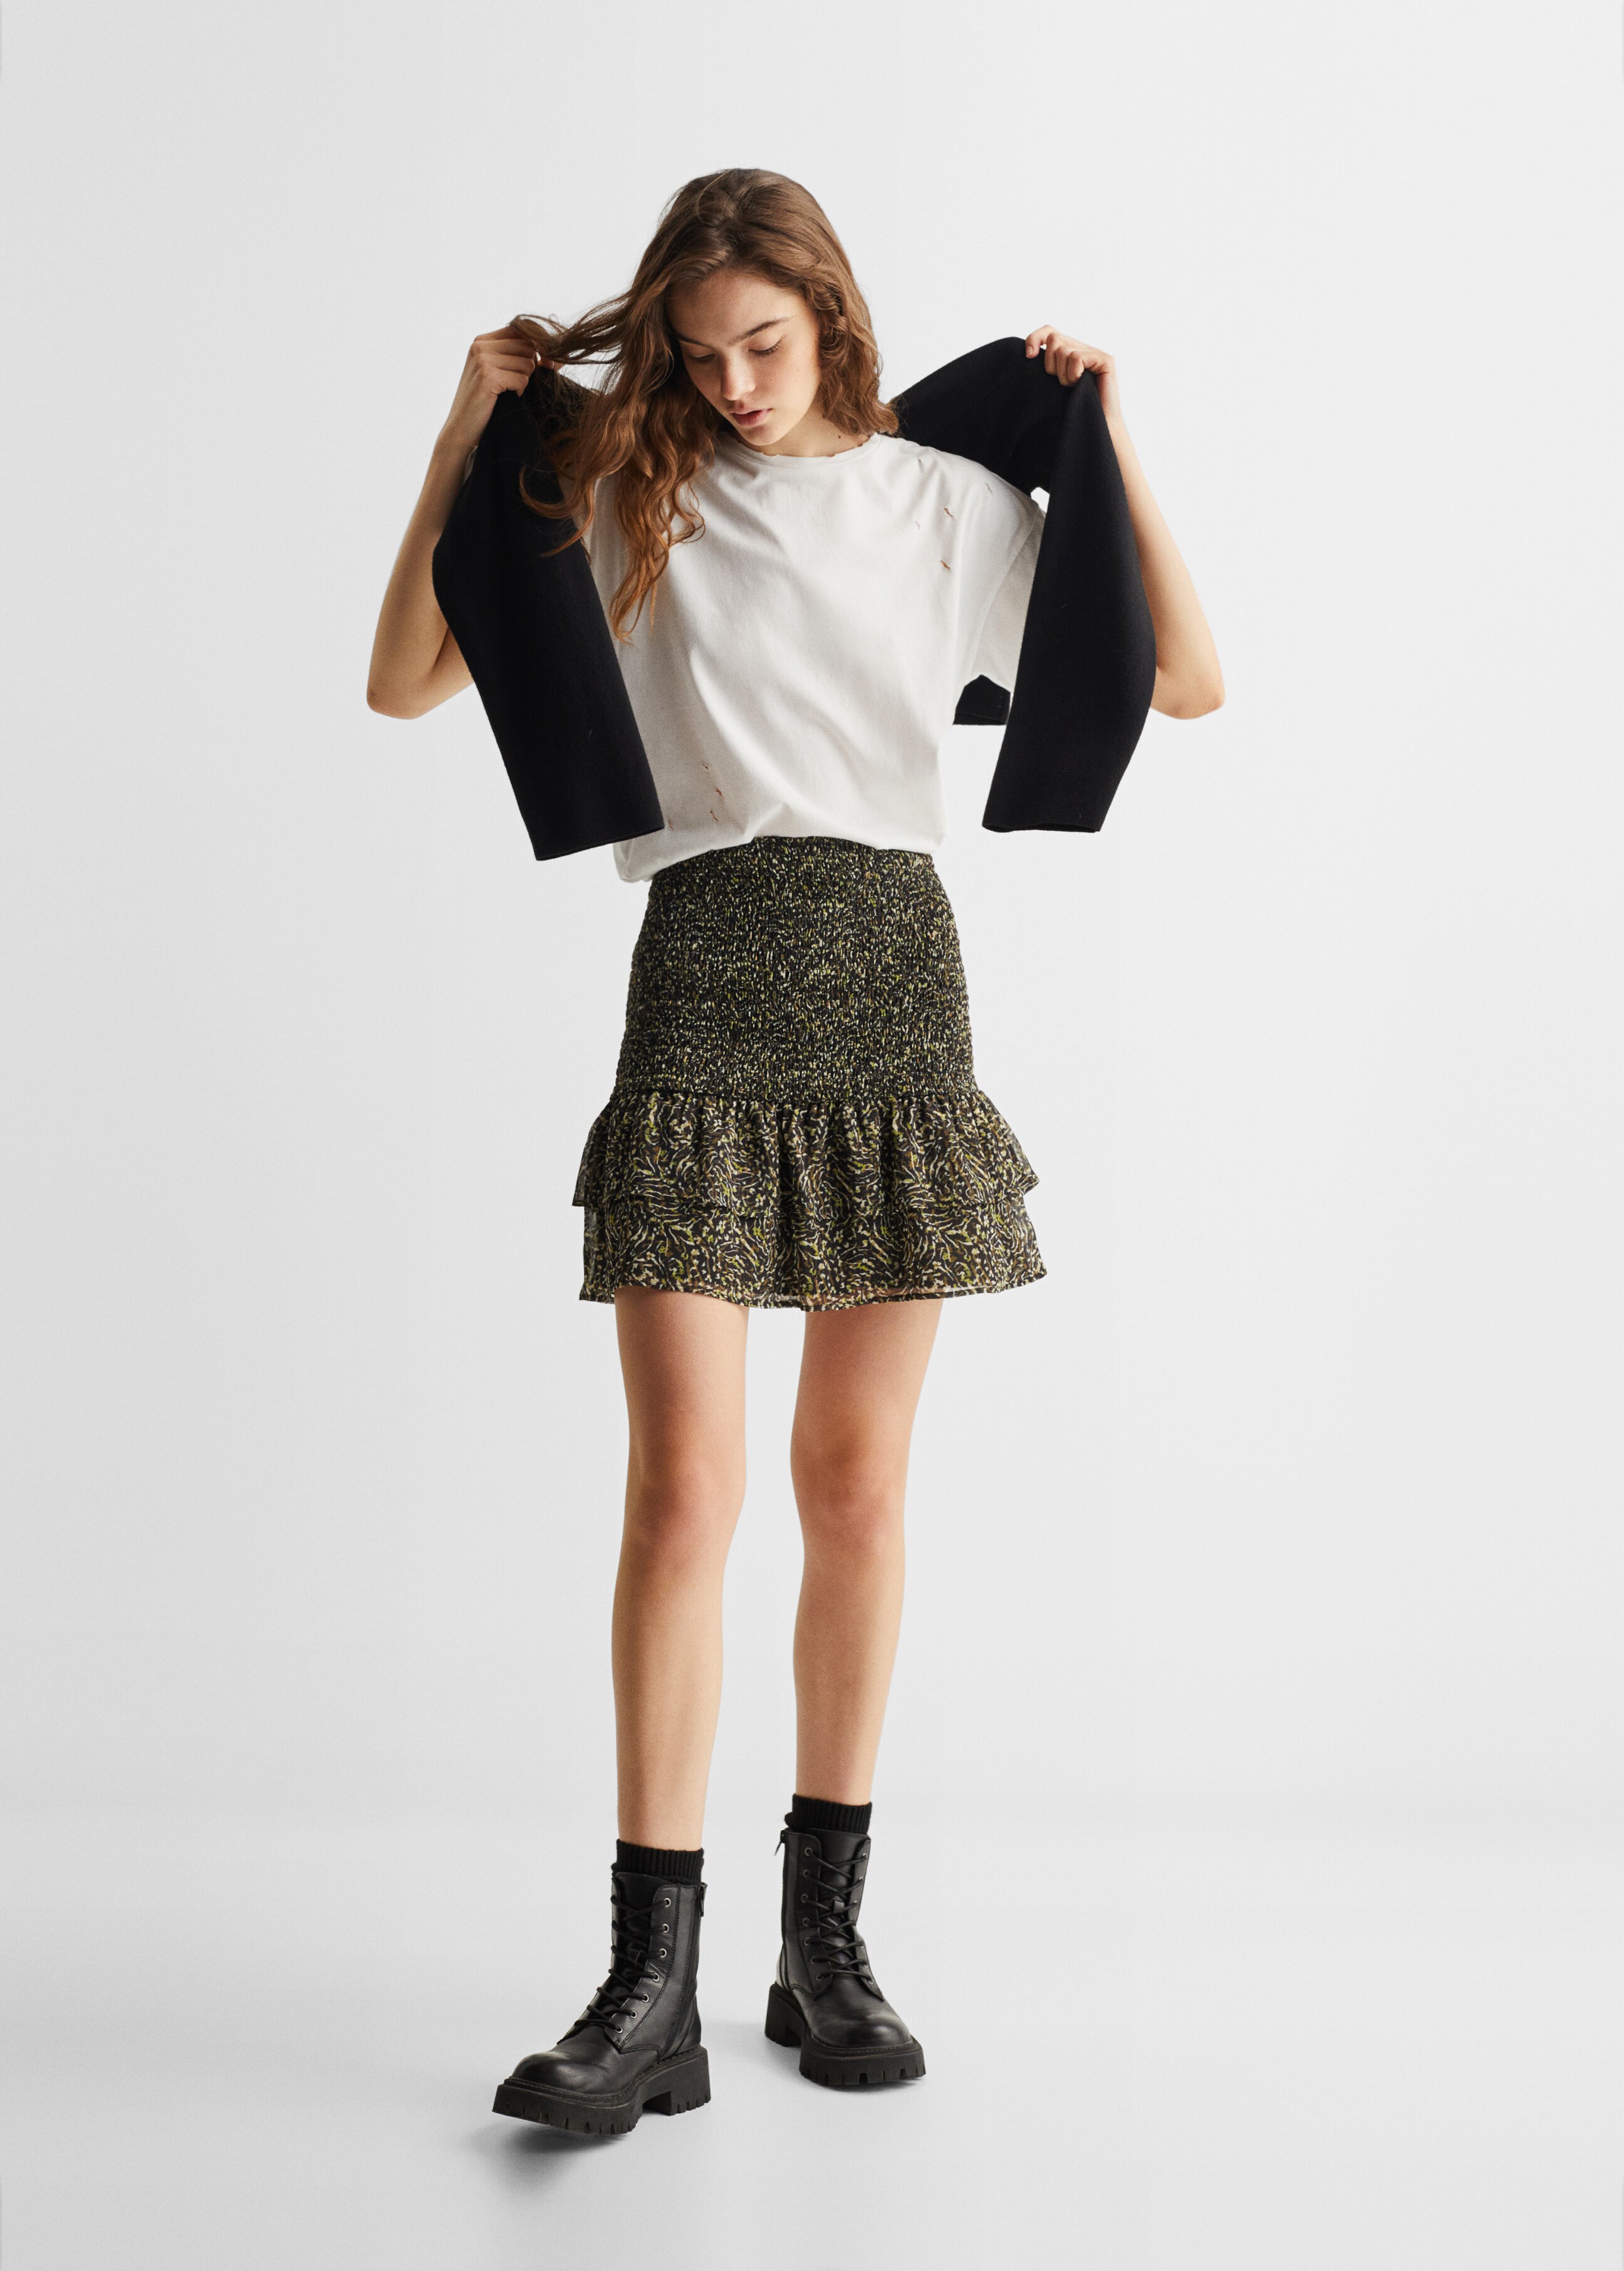 Printed skirt with ruffles - General plane